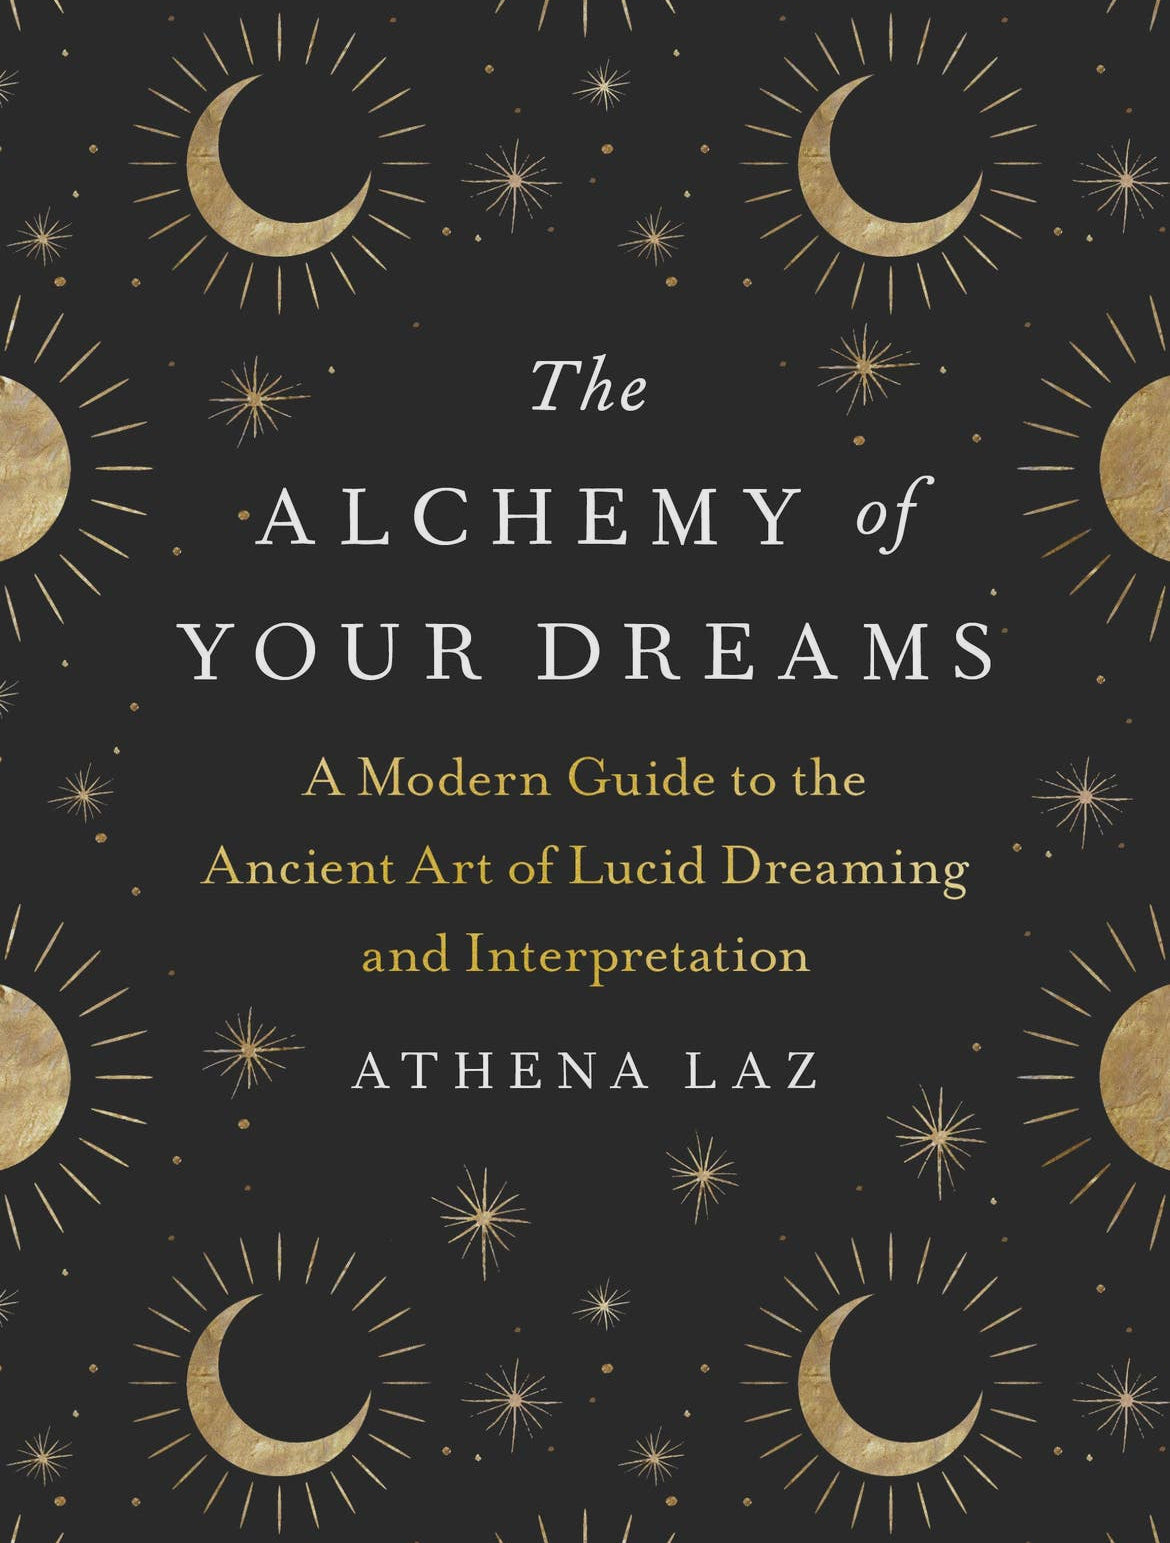 The Alchemy of Your Dreams: The Ancient Art of Lucid Dreaming